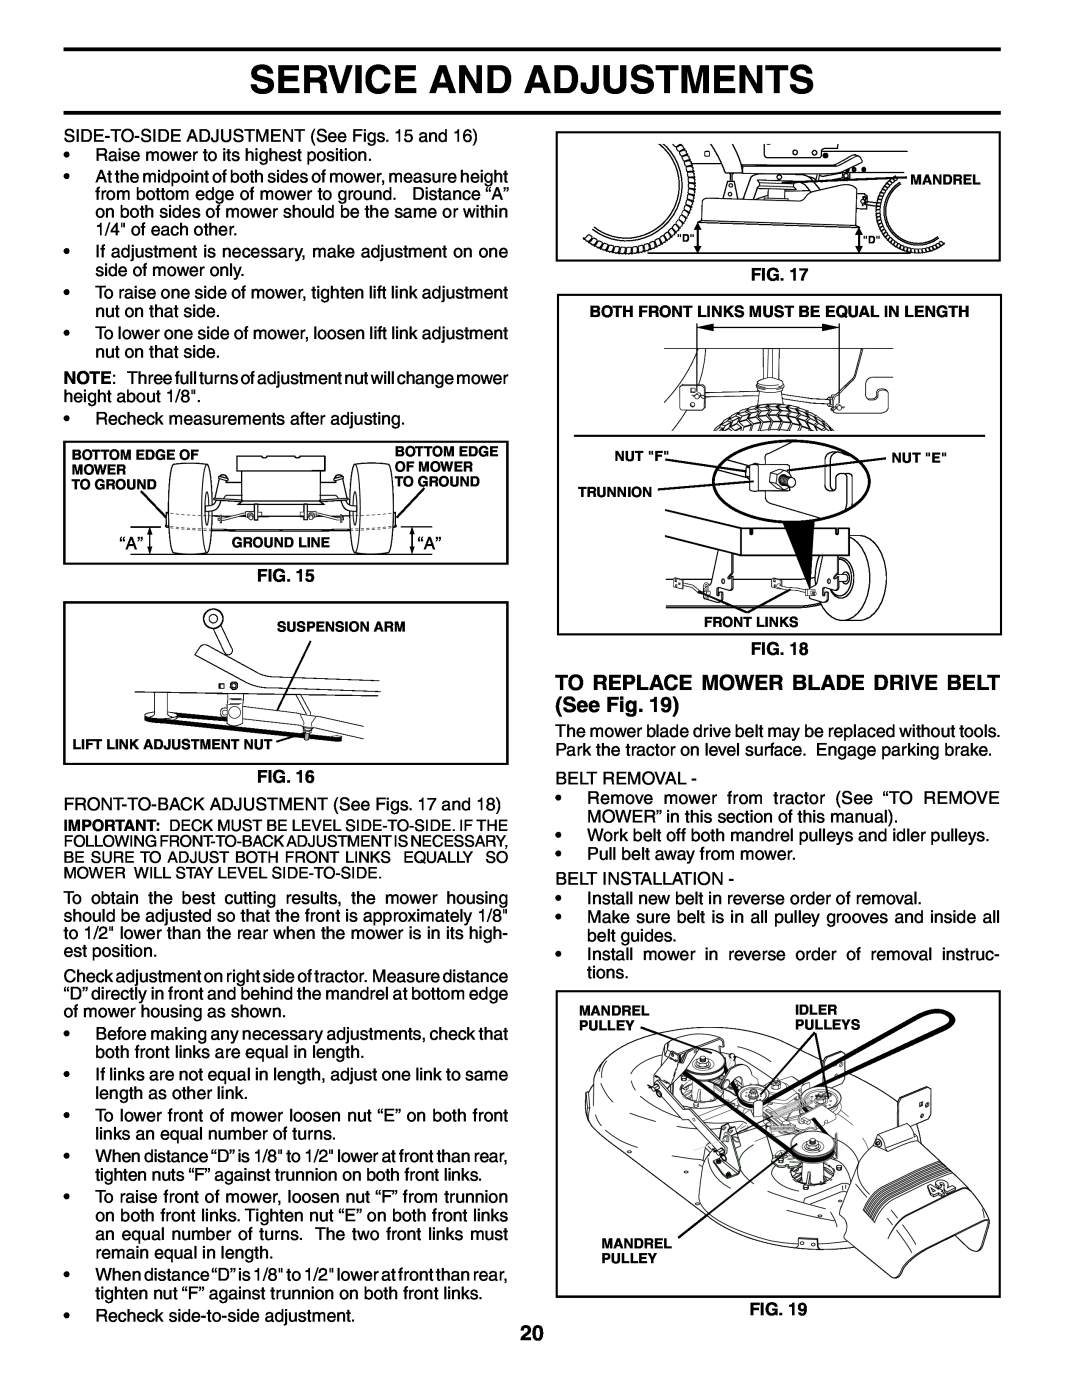 Poulan 195620 manual TO REPLACE MOWER BLADE DRIVE BELT See Fig, Service And Adjustments 